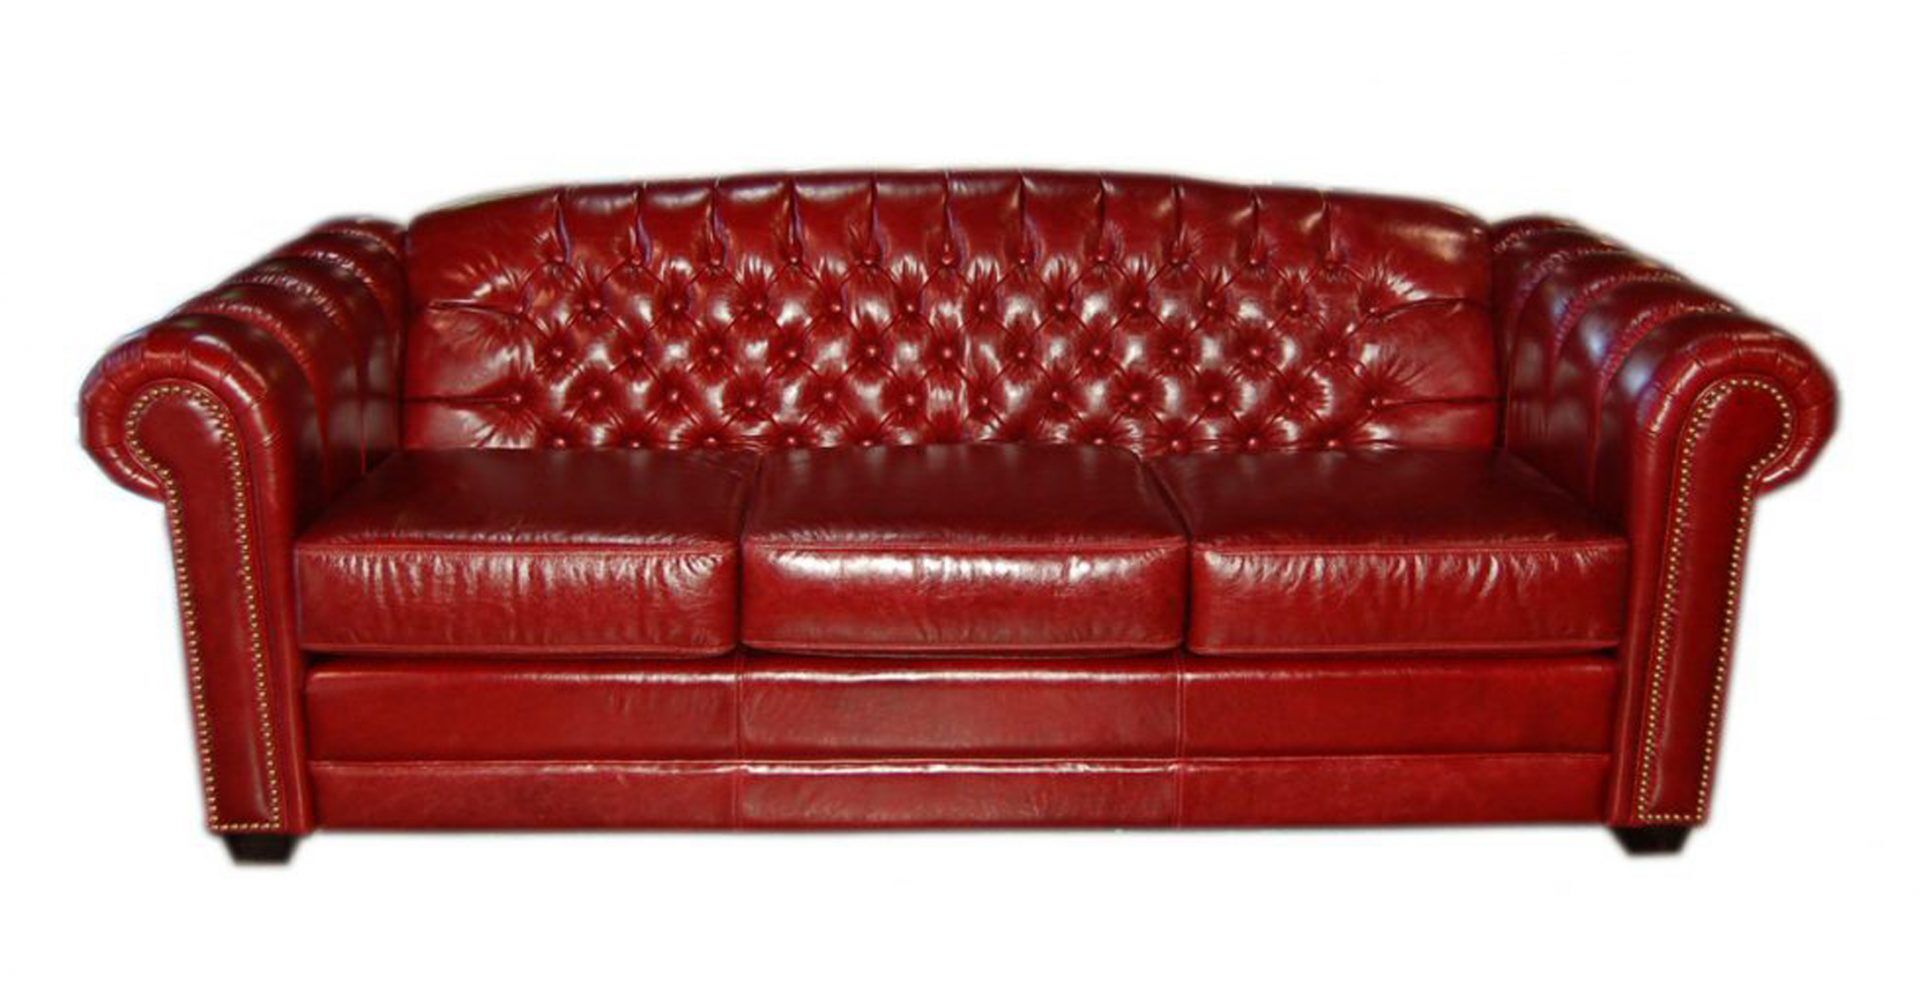 leather sofa bed seattle